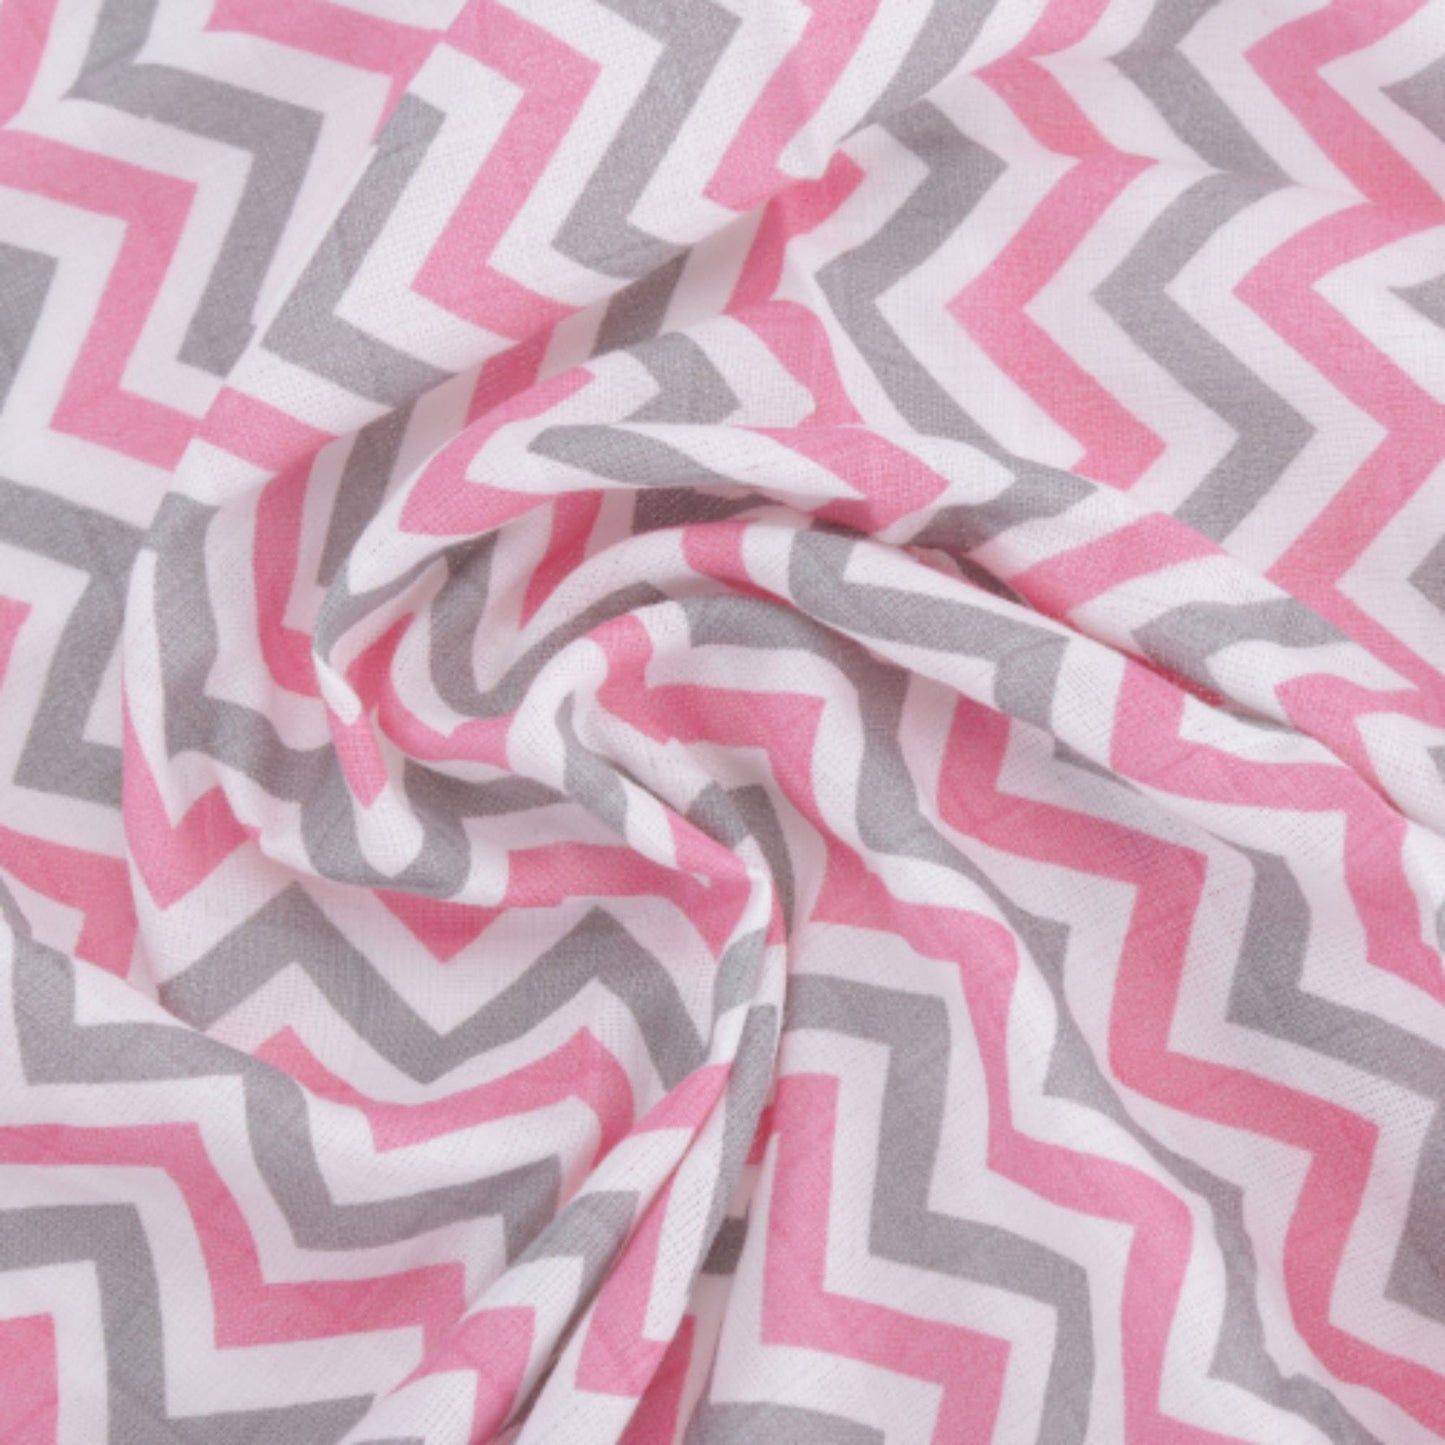 Chevron Stripes 100% Cotton Muslin Swaddle Pack Of 2 (Pink, Flamingo) - haus & kinder